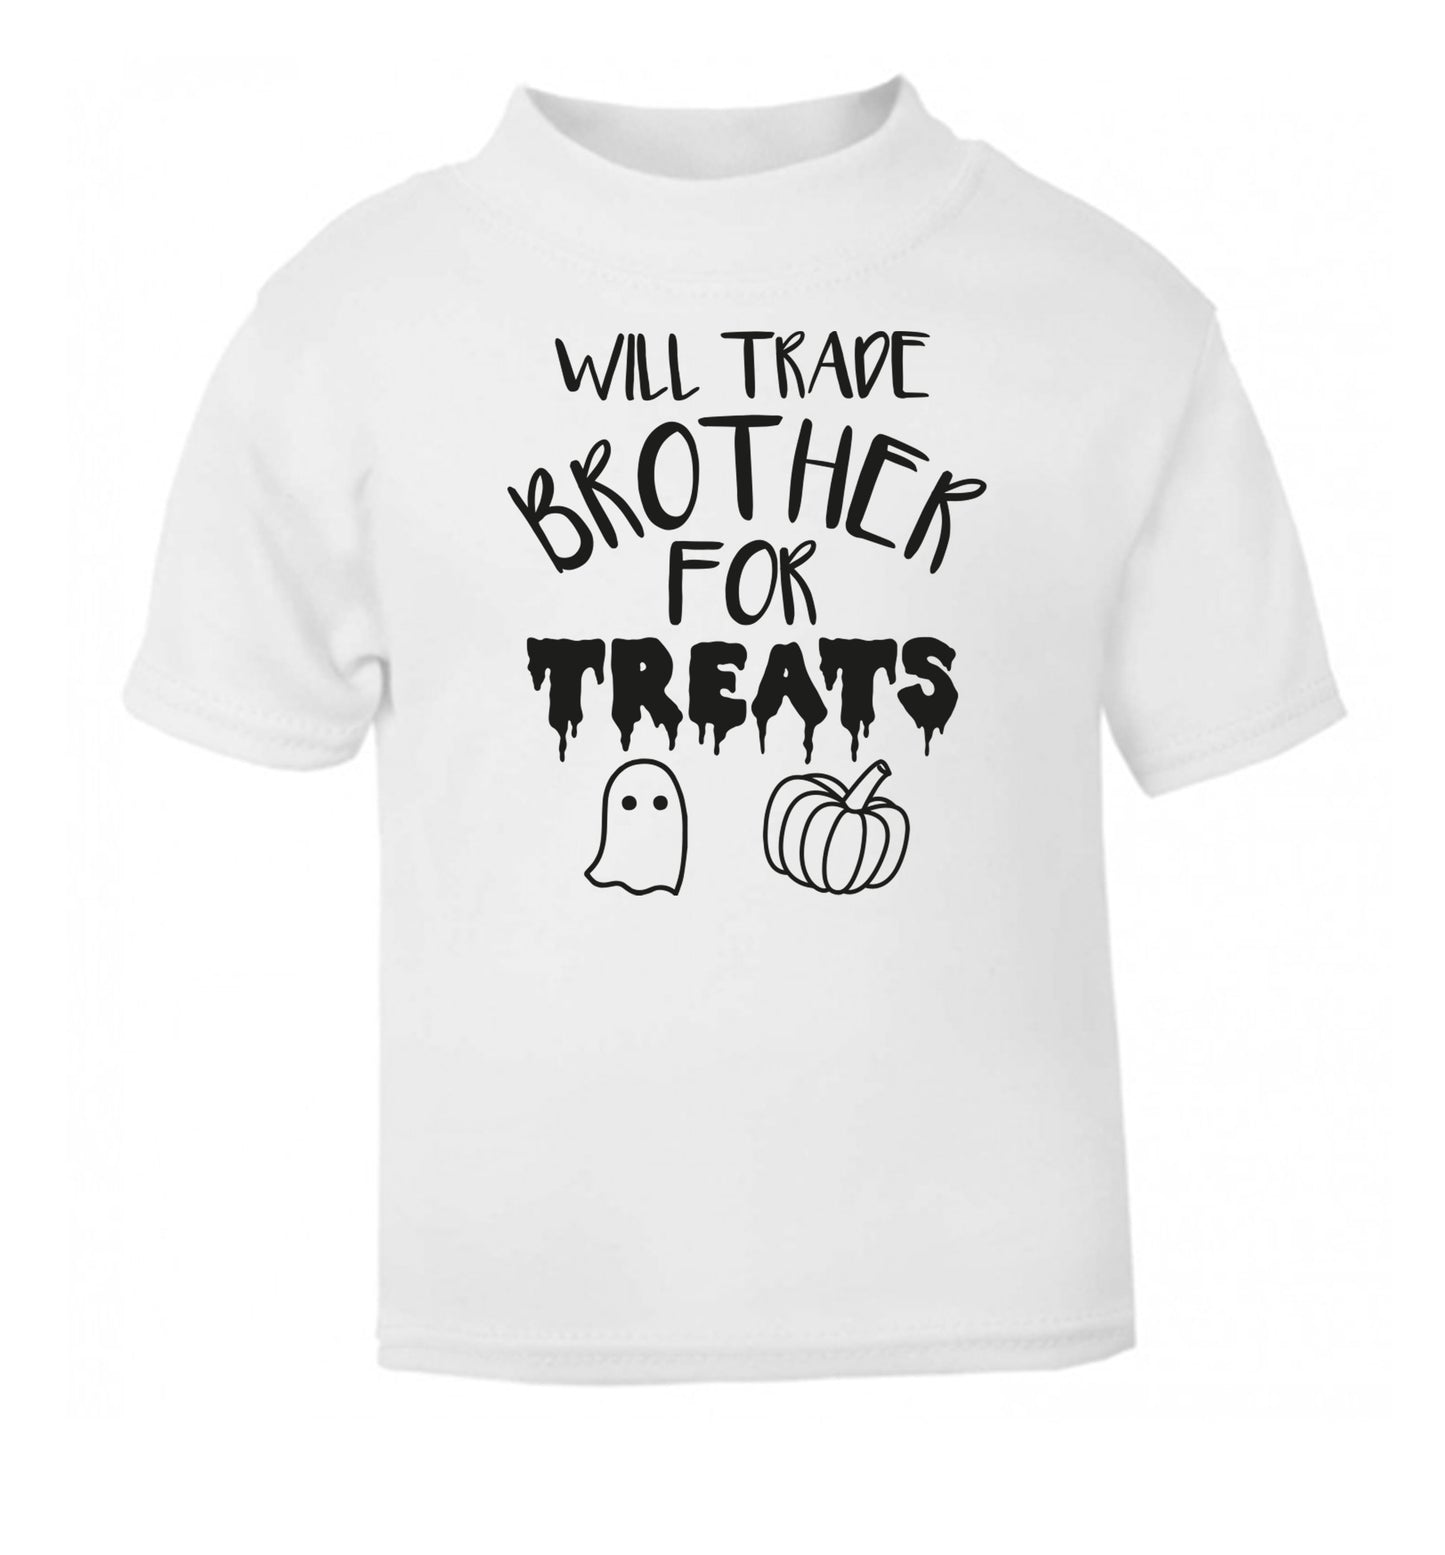 Will trade brother for treats white Baby Toddler Tshirt 2 Years